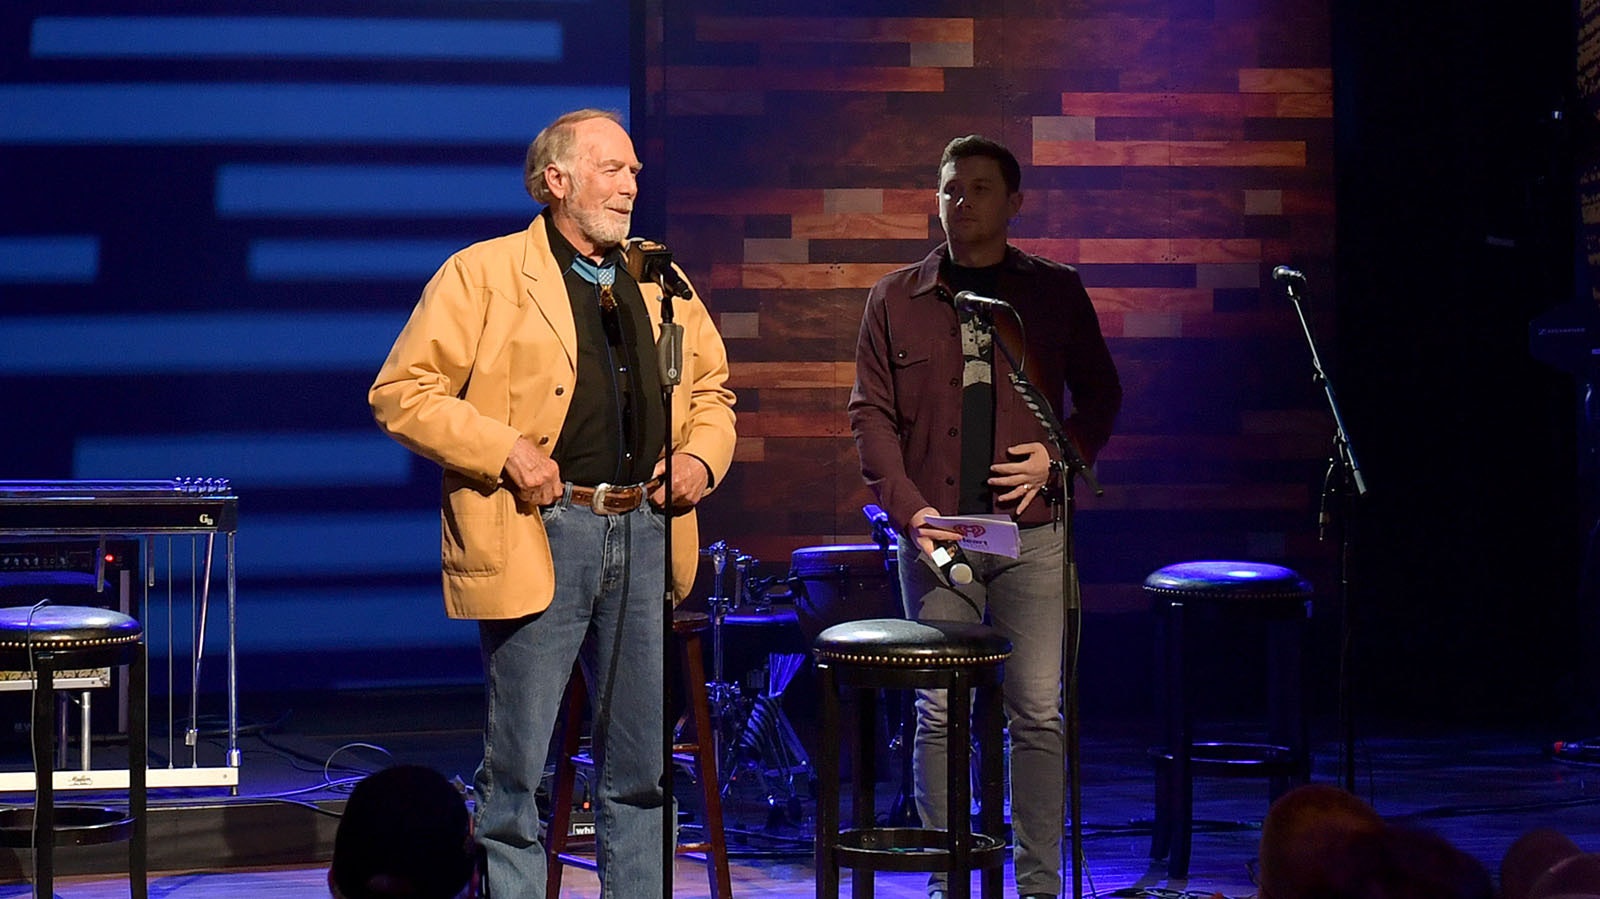 Medal of Honor recipient Drew Dix speaks on stage during iHeartCountry One Night For Our Military Presented by Roche at the Country Music Hall of Fame on Nov. 07, 2019, in Nashville, Tennessee.